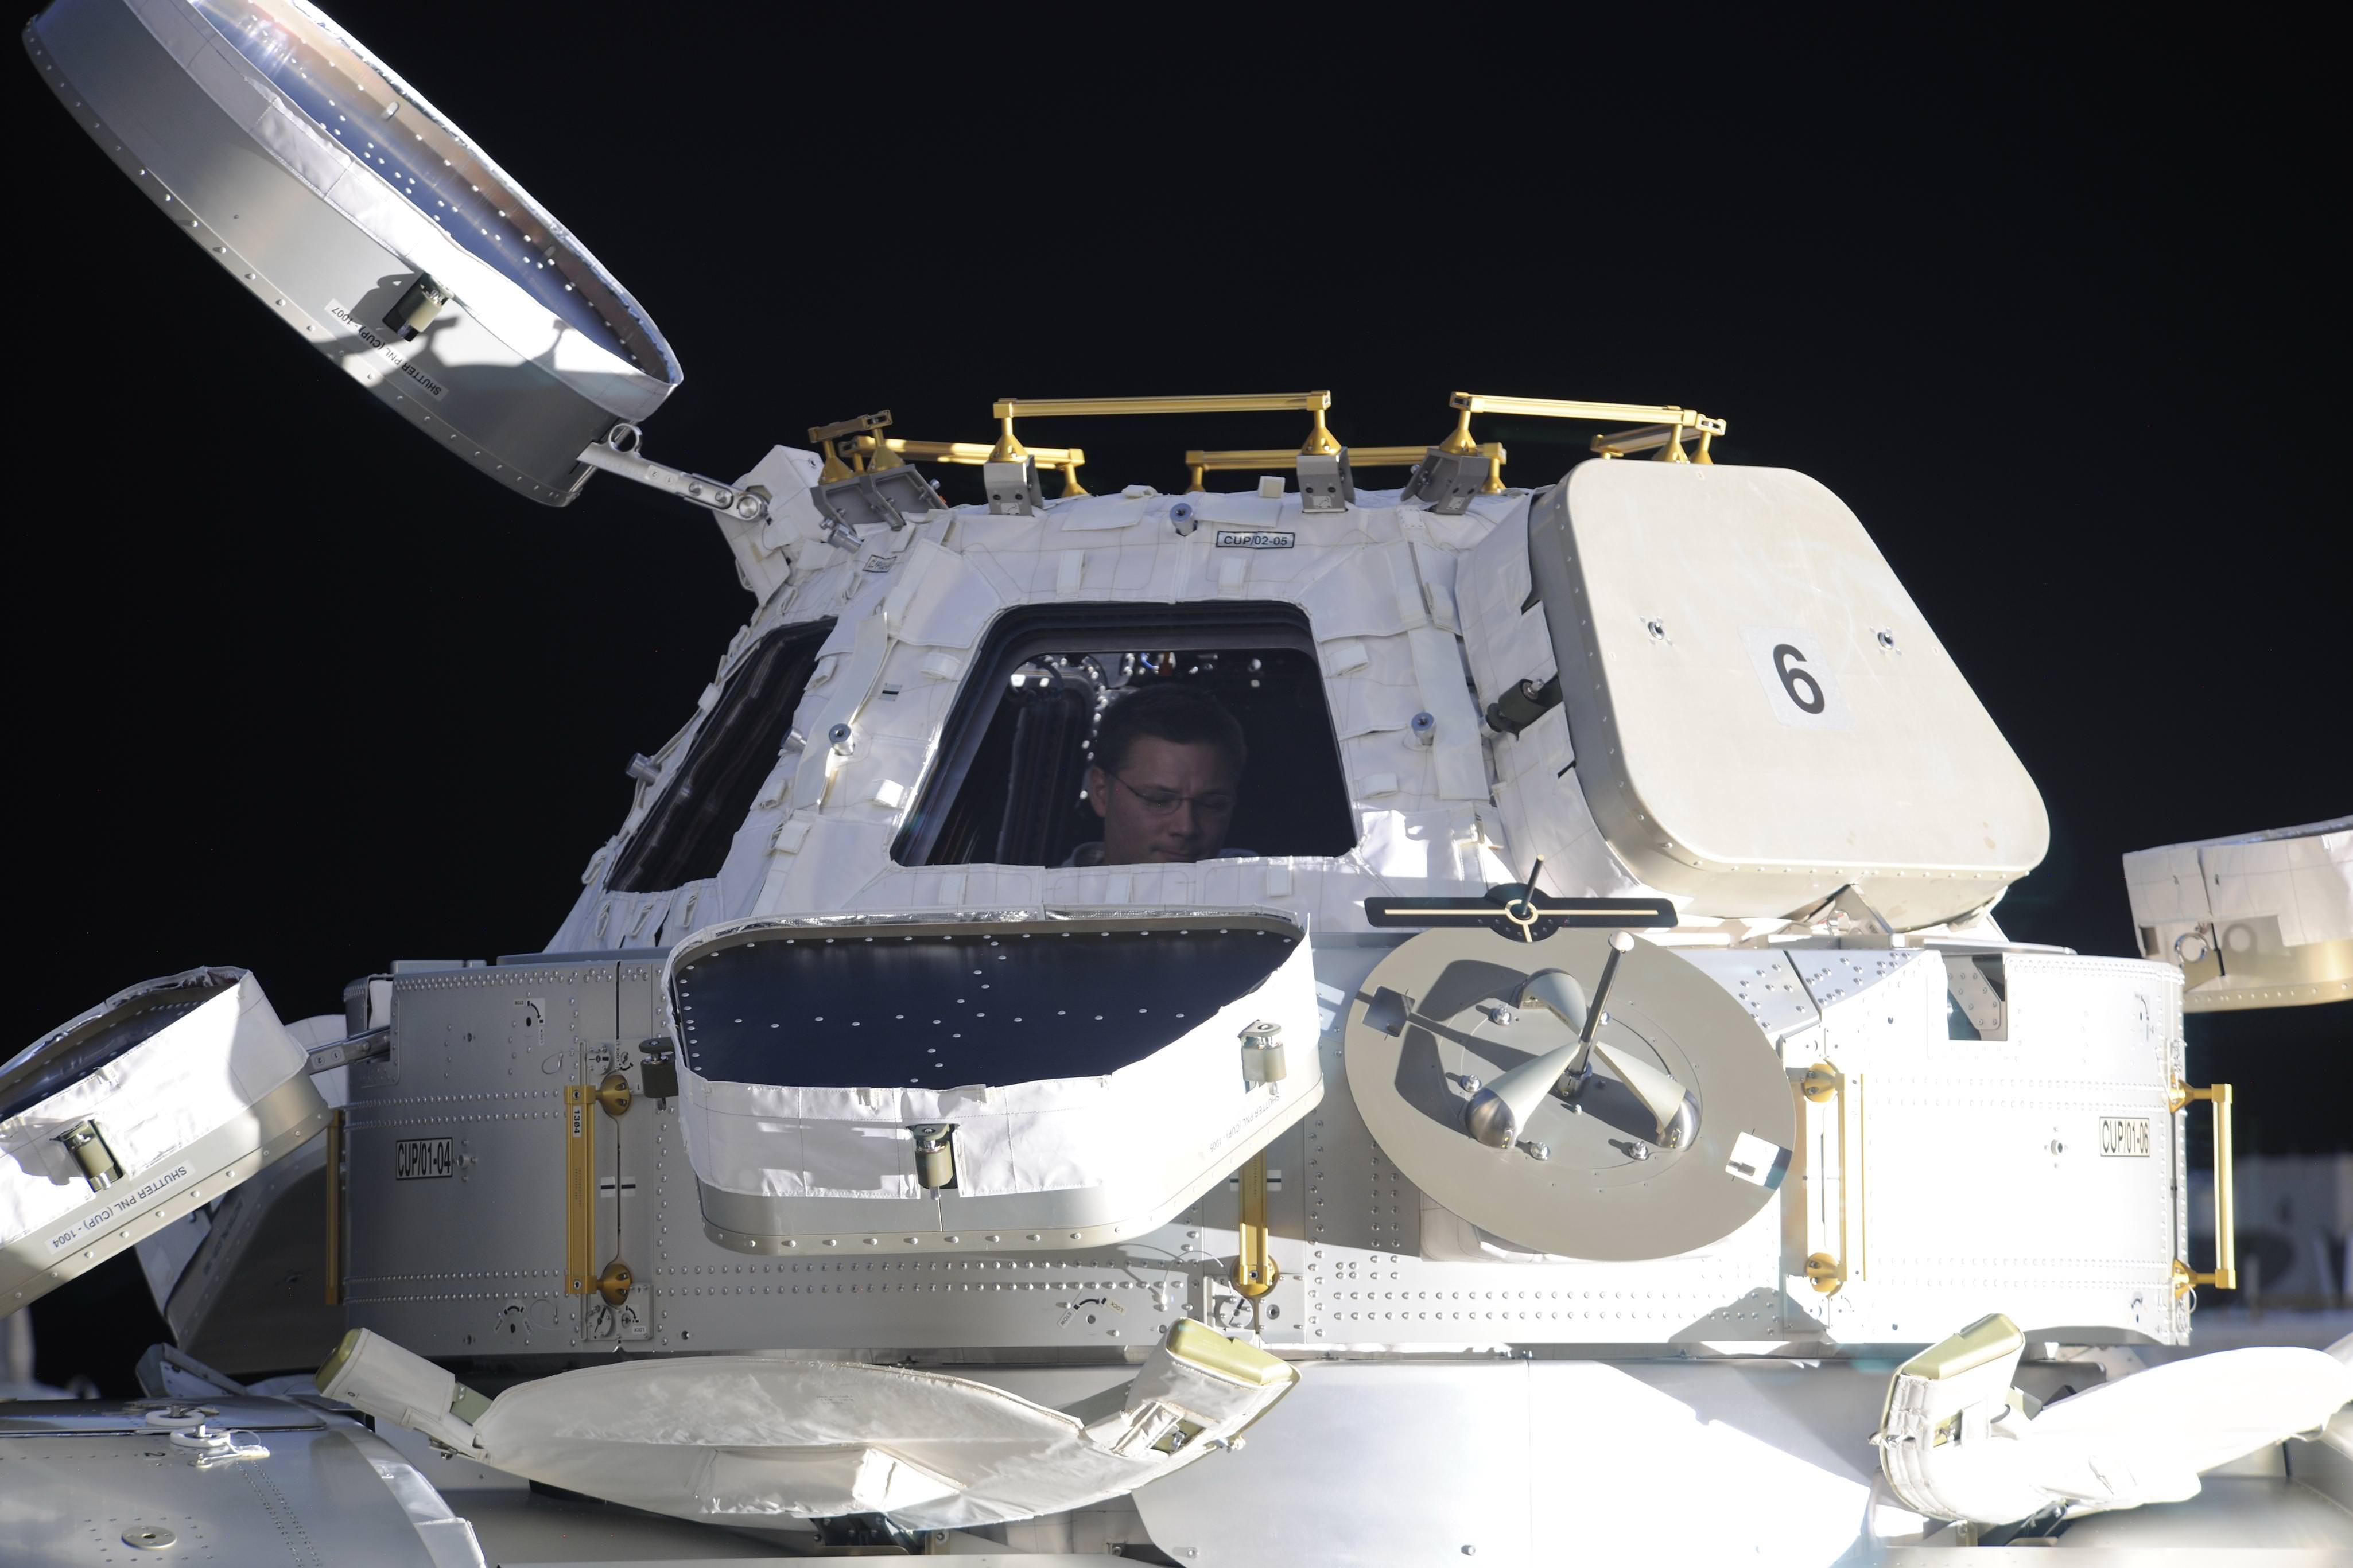 From the outside, the cupola looks like an extraterrestrial spacecraft. That's Douglas Wheelock (Expedition 25) inside the window. Credit: NASA